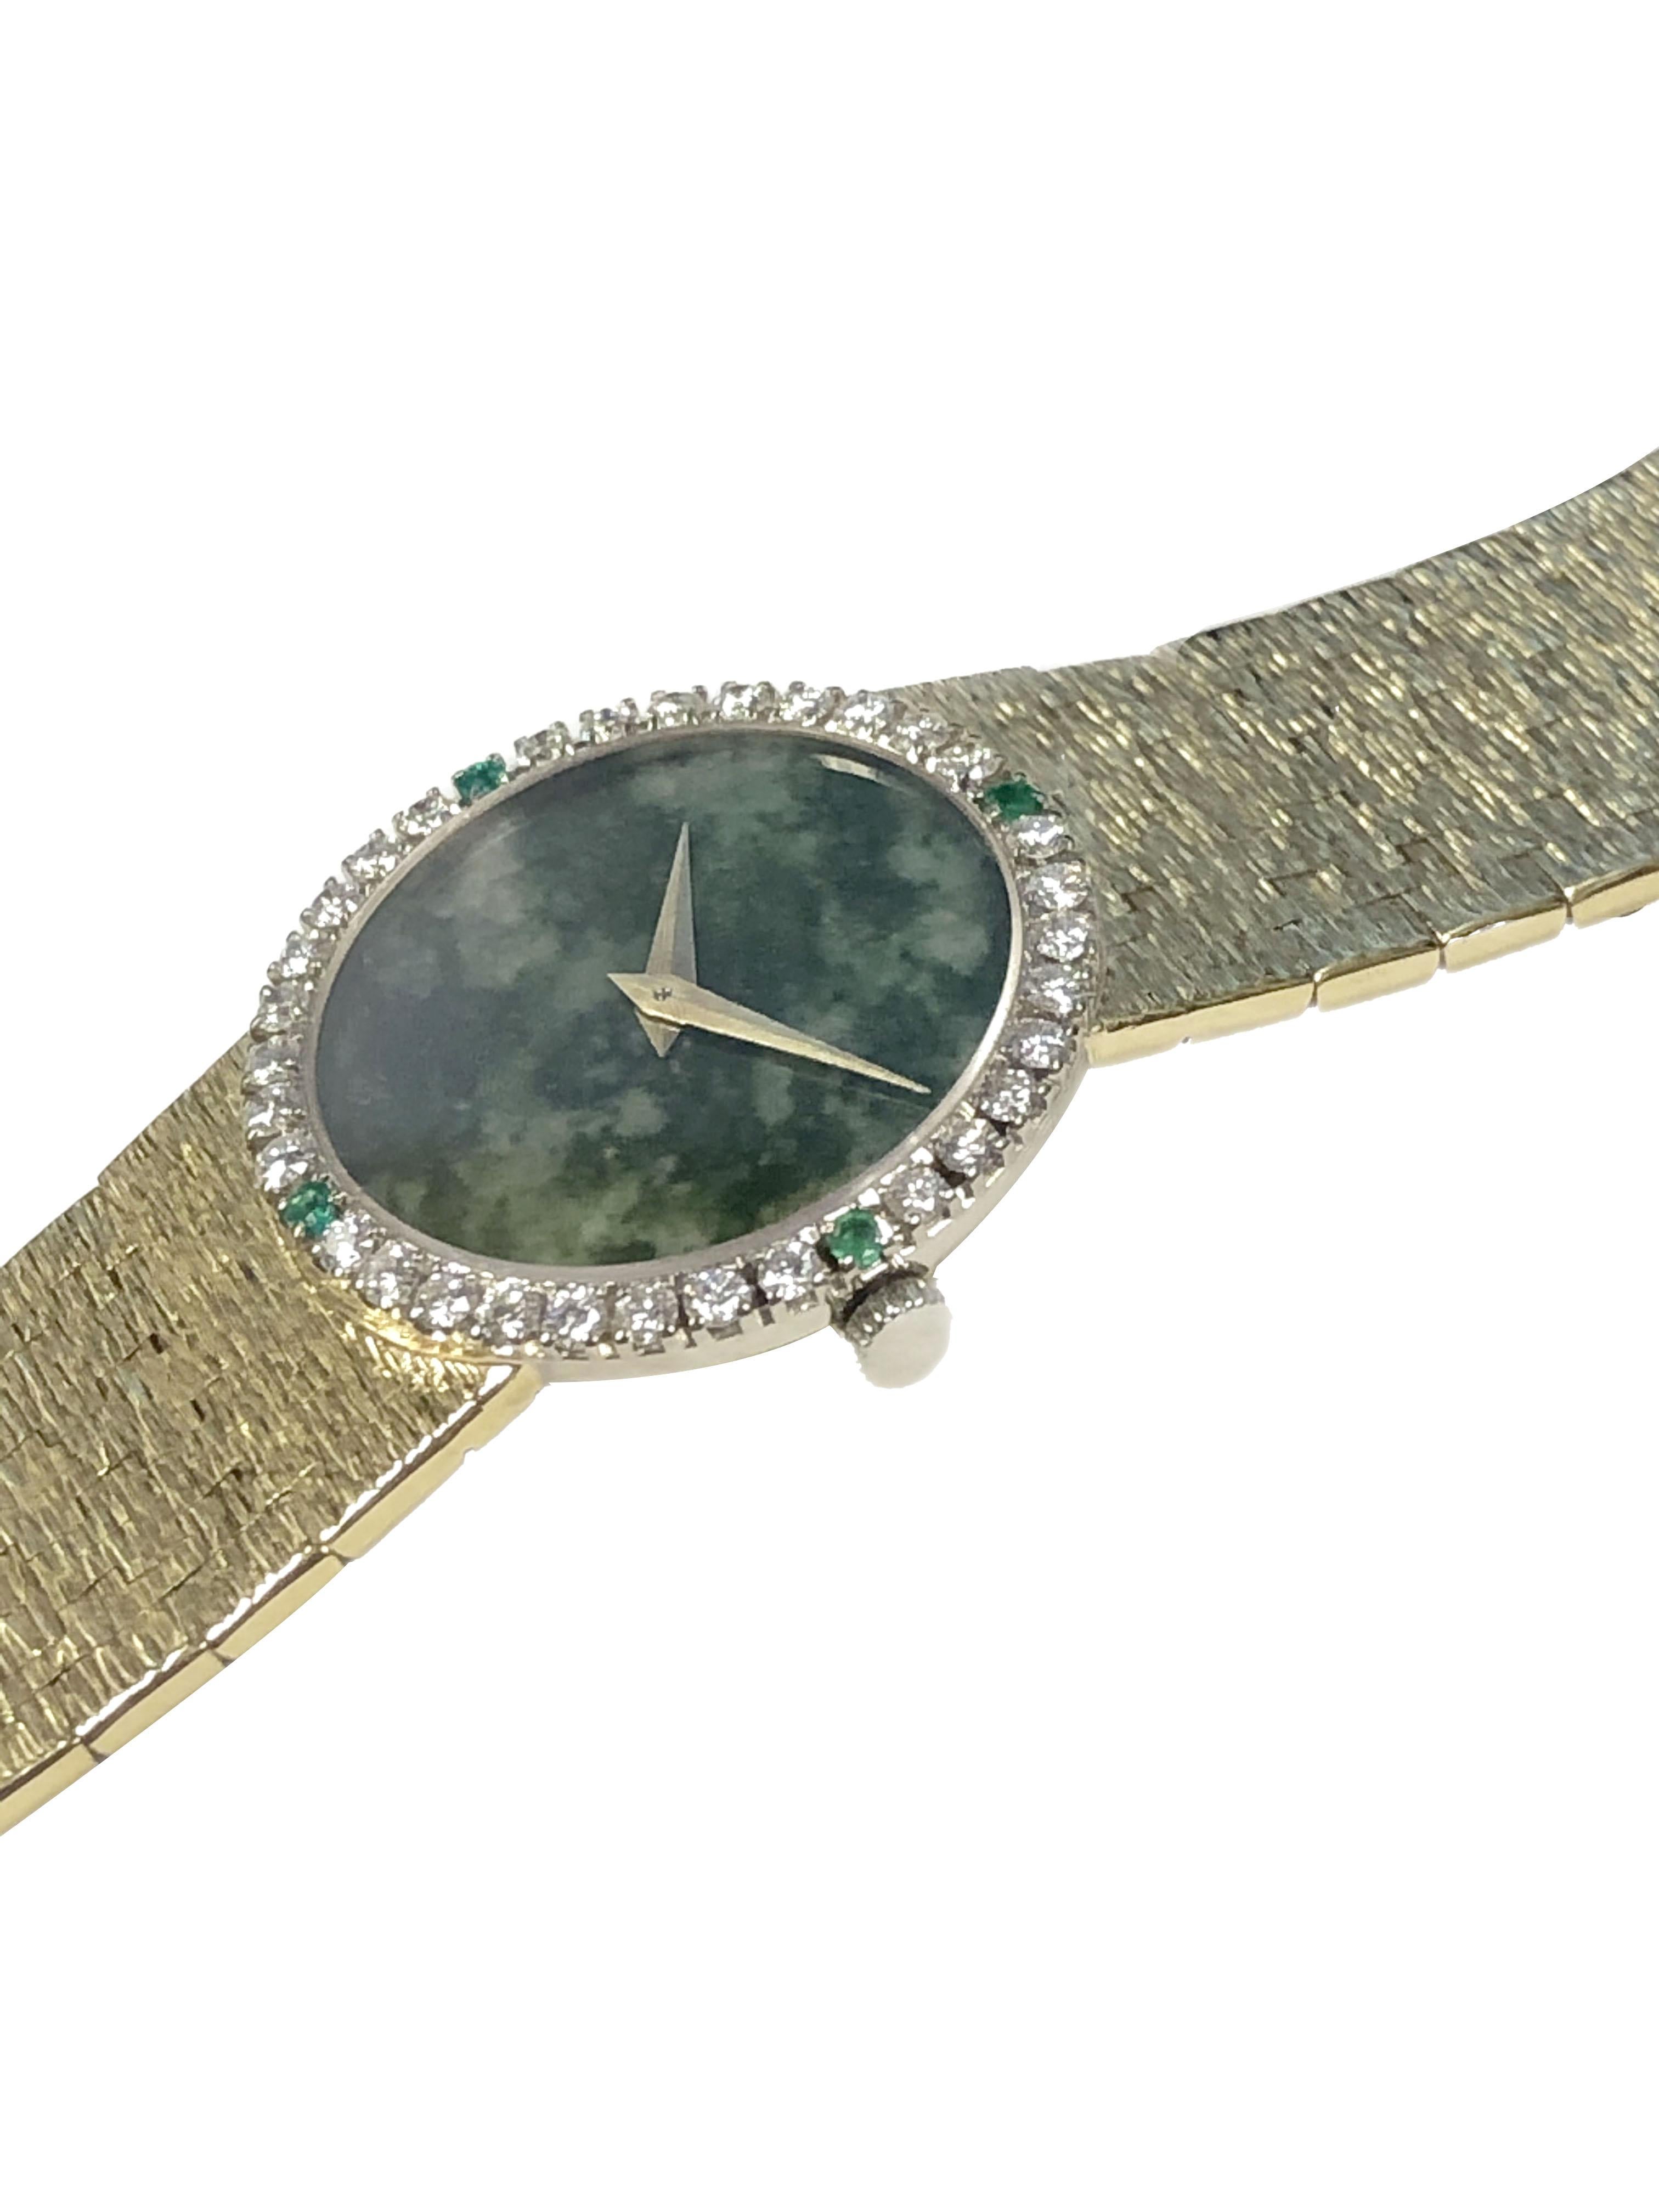 Circa 1970s Ladies Piaget Wrist Watch, 24 M.M. 18K yellow Gold 2 piece case, Diamond and Emerald set Bezel, 17 jewel mechanical, manual wind movement. Jadite stone dial. 5/8 inch wide soft flexible textured bracelet, watch length 7 inches. Recently